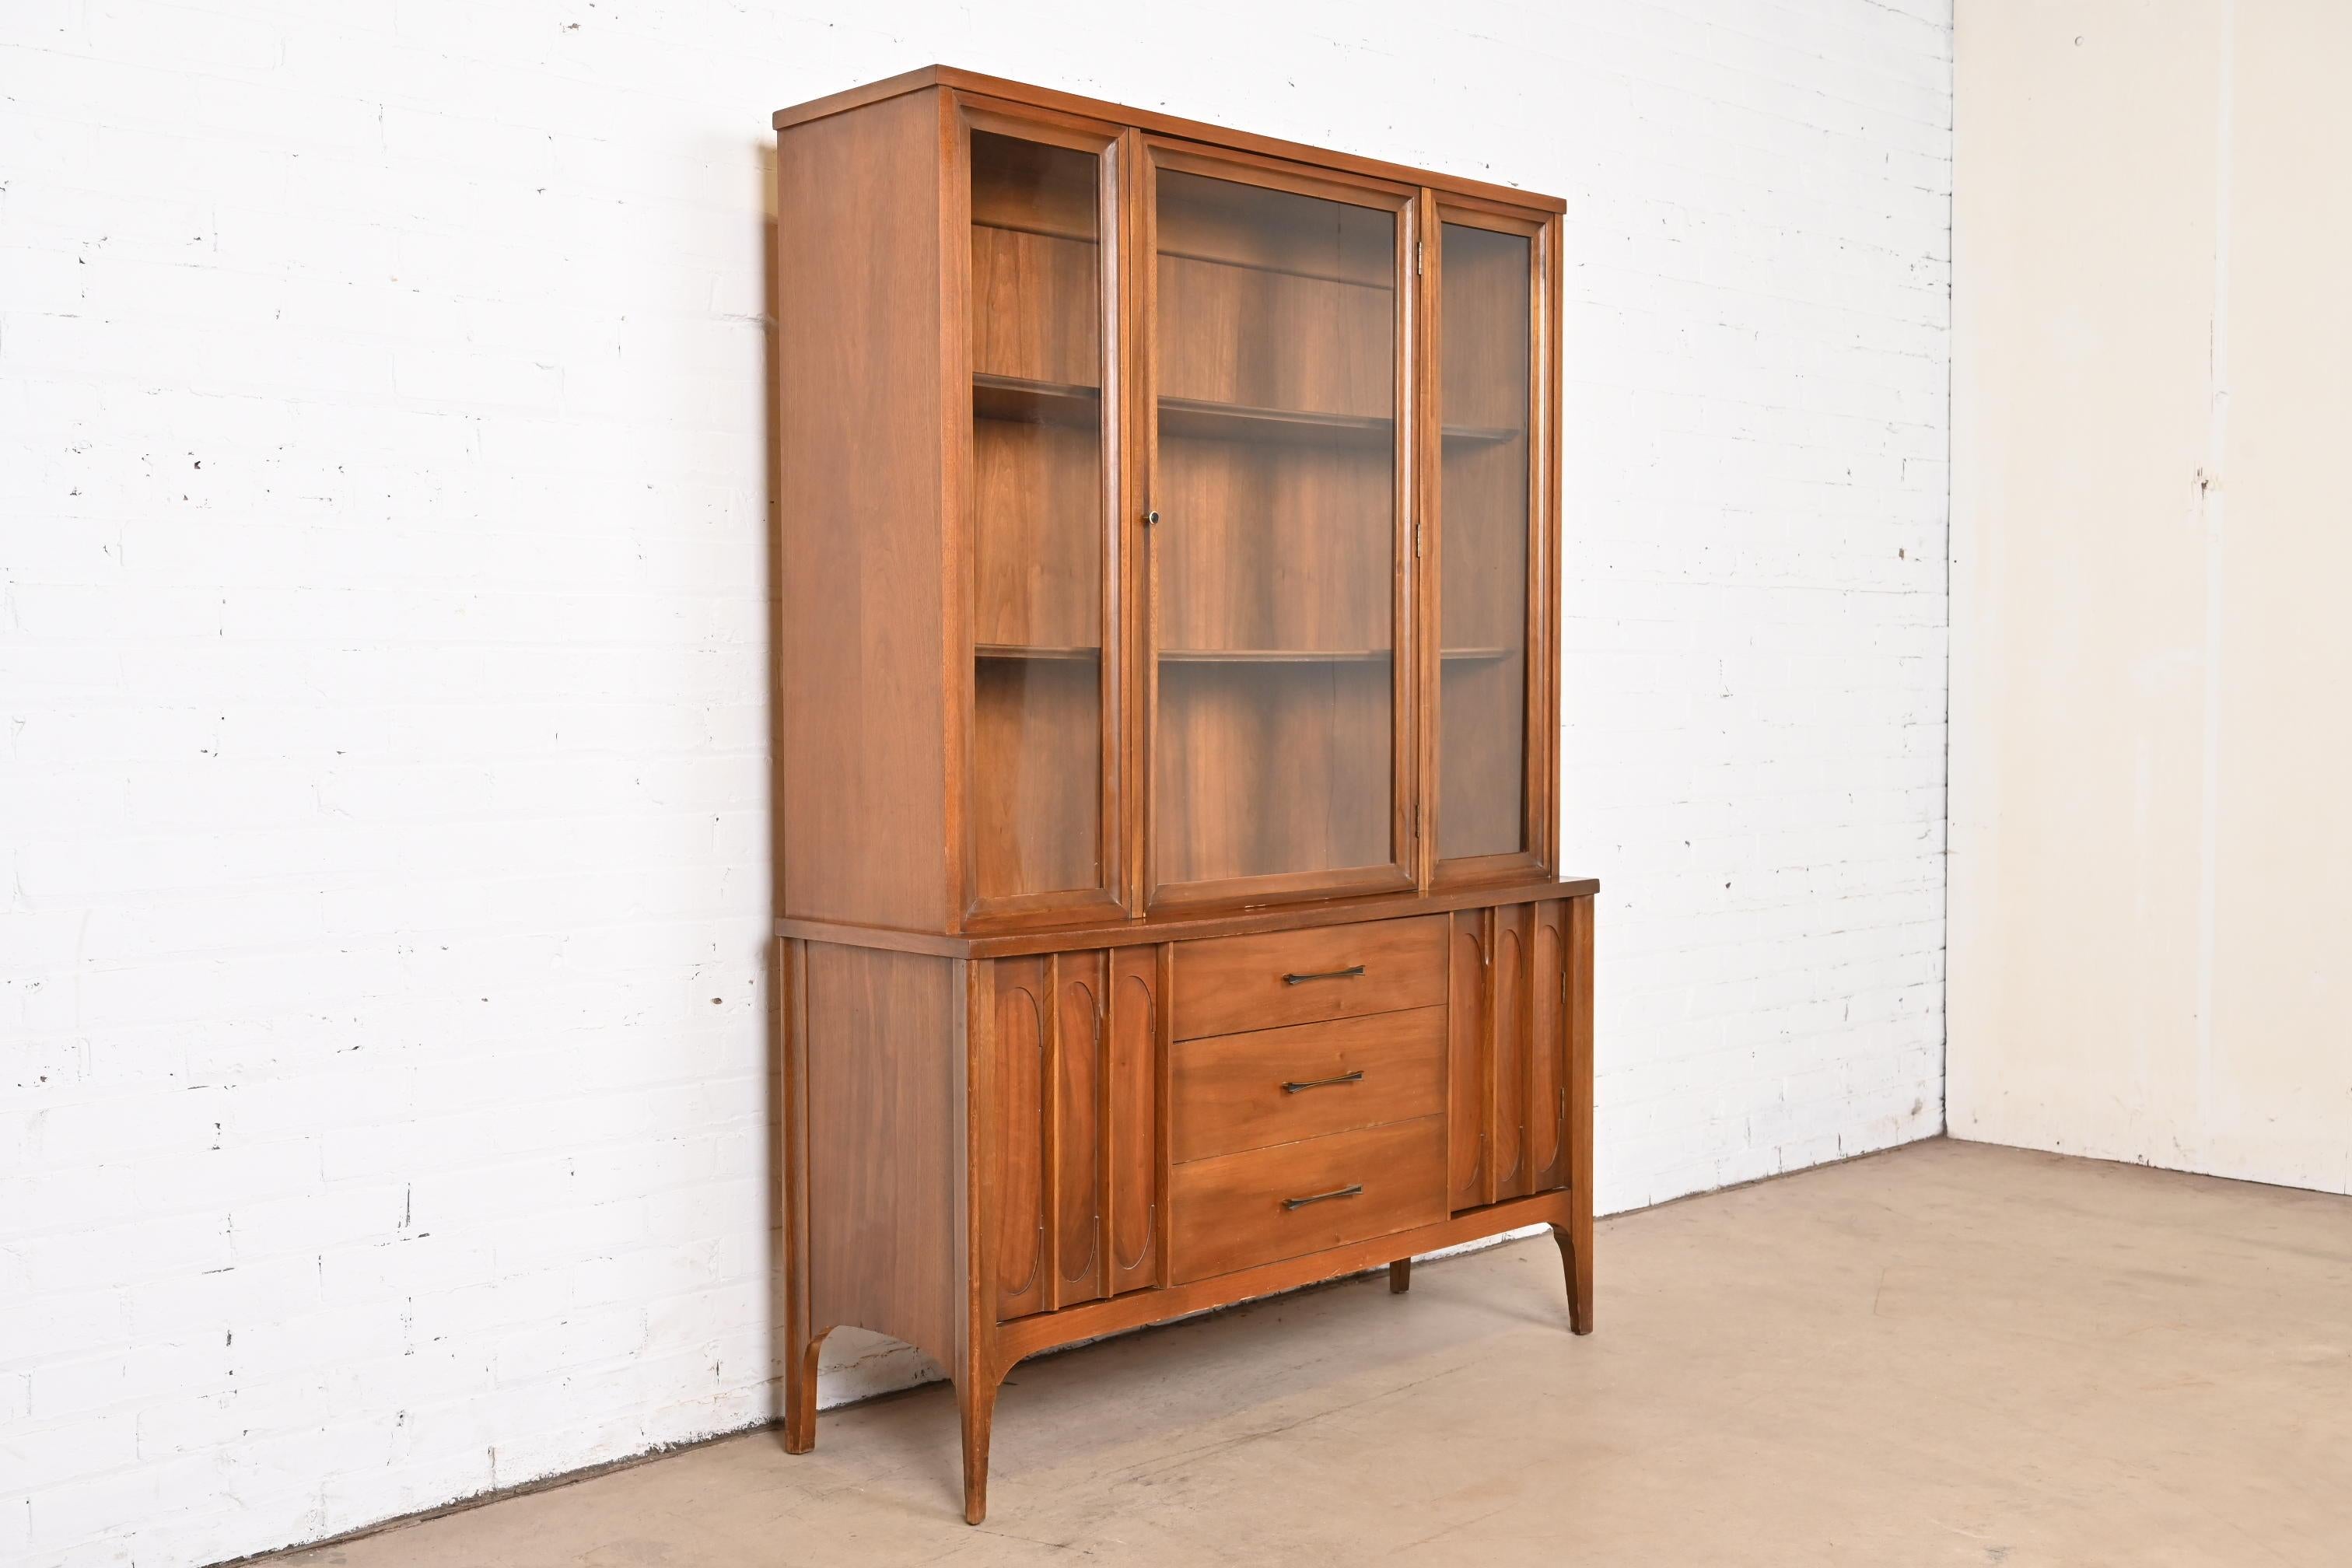 Mid-20th Century Broyhill Brasilia Style Sculpted Walnut Breakfront Bookcase or China Cabinet